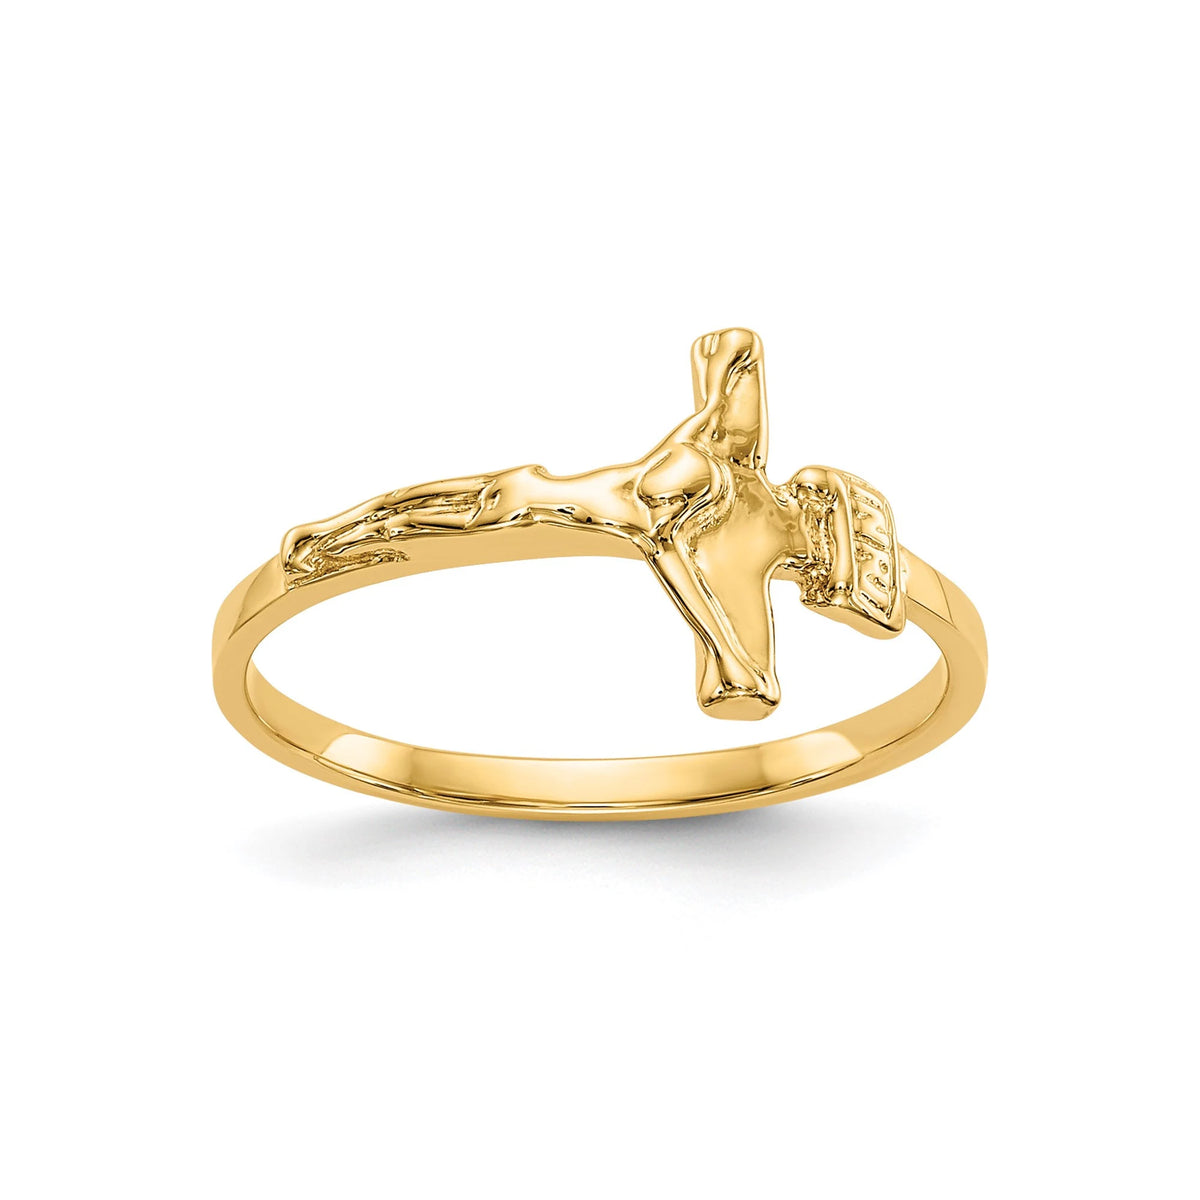 14k Yellow Gold Raised Cross Ring Baby Child  Size 2 - 6 Baby/Toddler Size Children's Ring Band with Cross - Gift Box Included - Made in USA